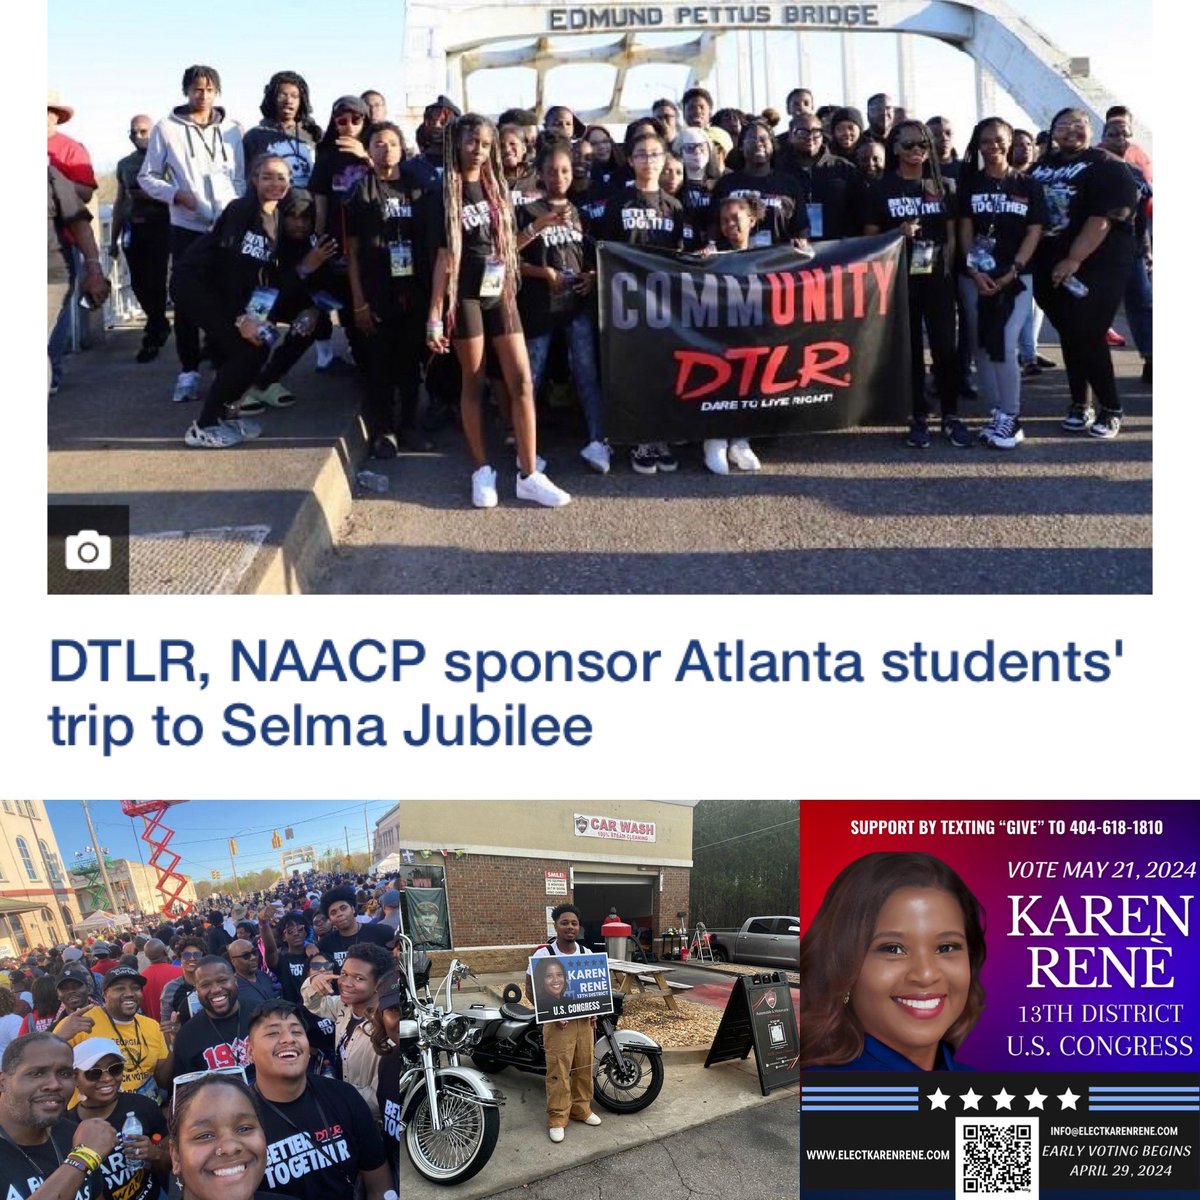 Last year I celebrated Selma Jubilee with the Atlanta NAACP. This year, I'm running for Congress in GA's 13th District. Thank you for your support! Join our movement at electkarenrene.com or text 'Give' to 404-618-1810. #electkarenreneforcongress13thDistrict #selmajubilee